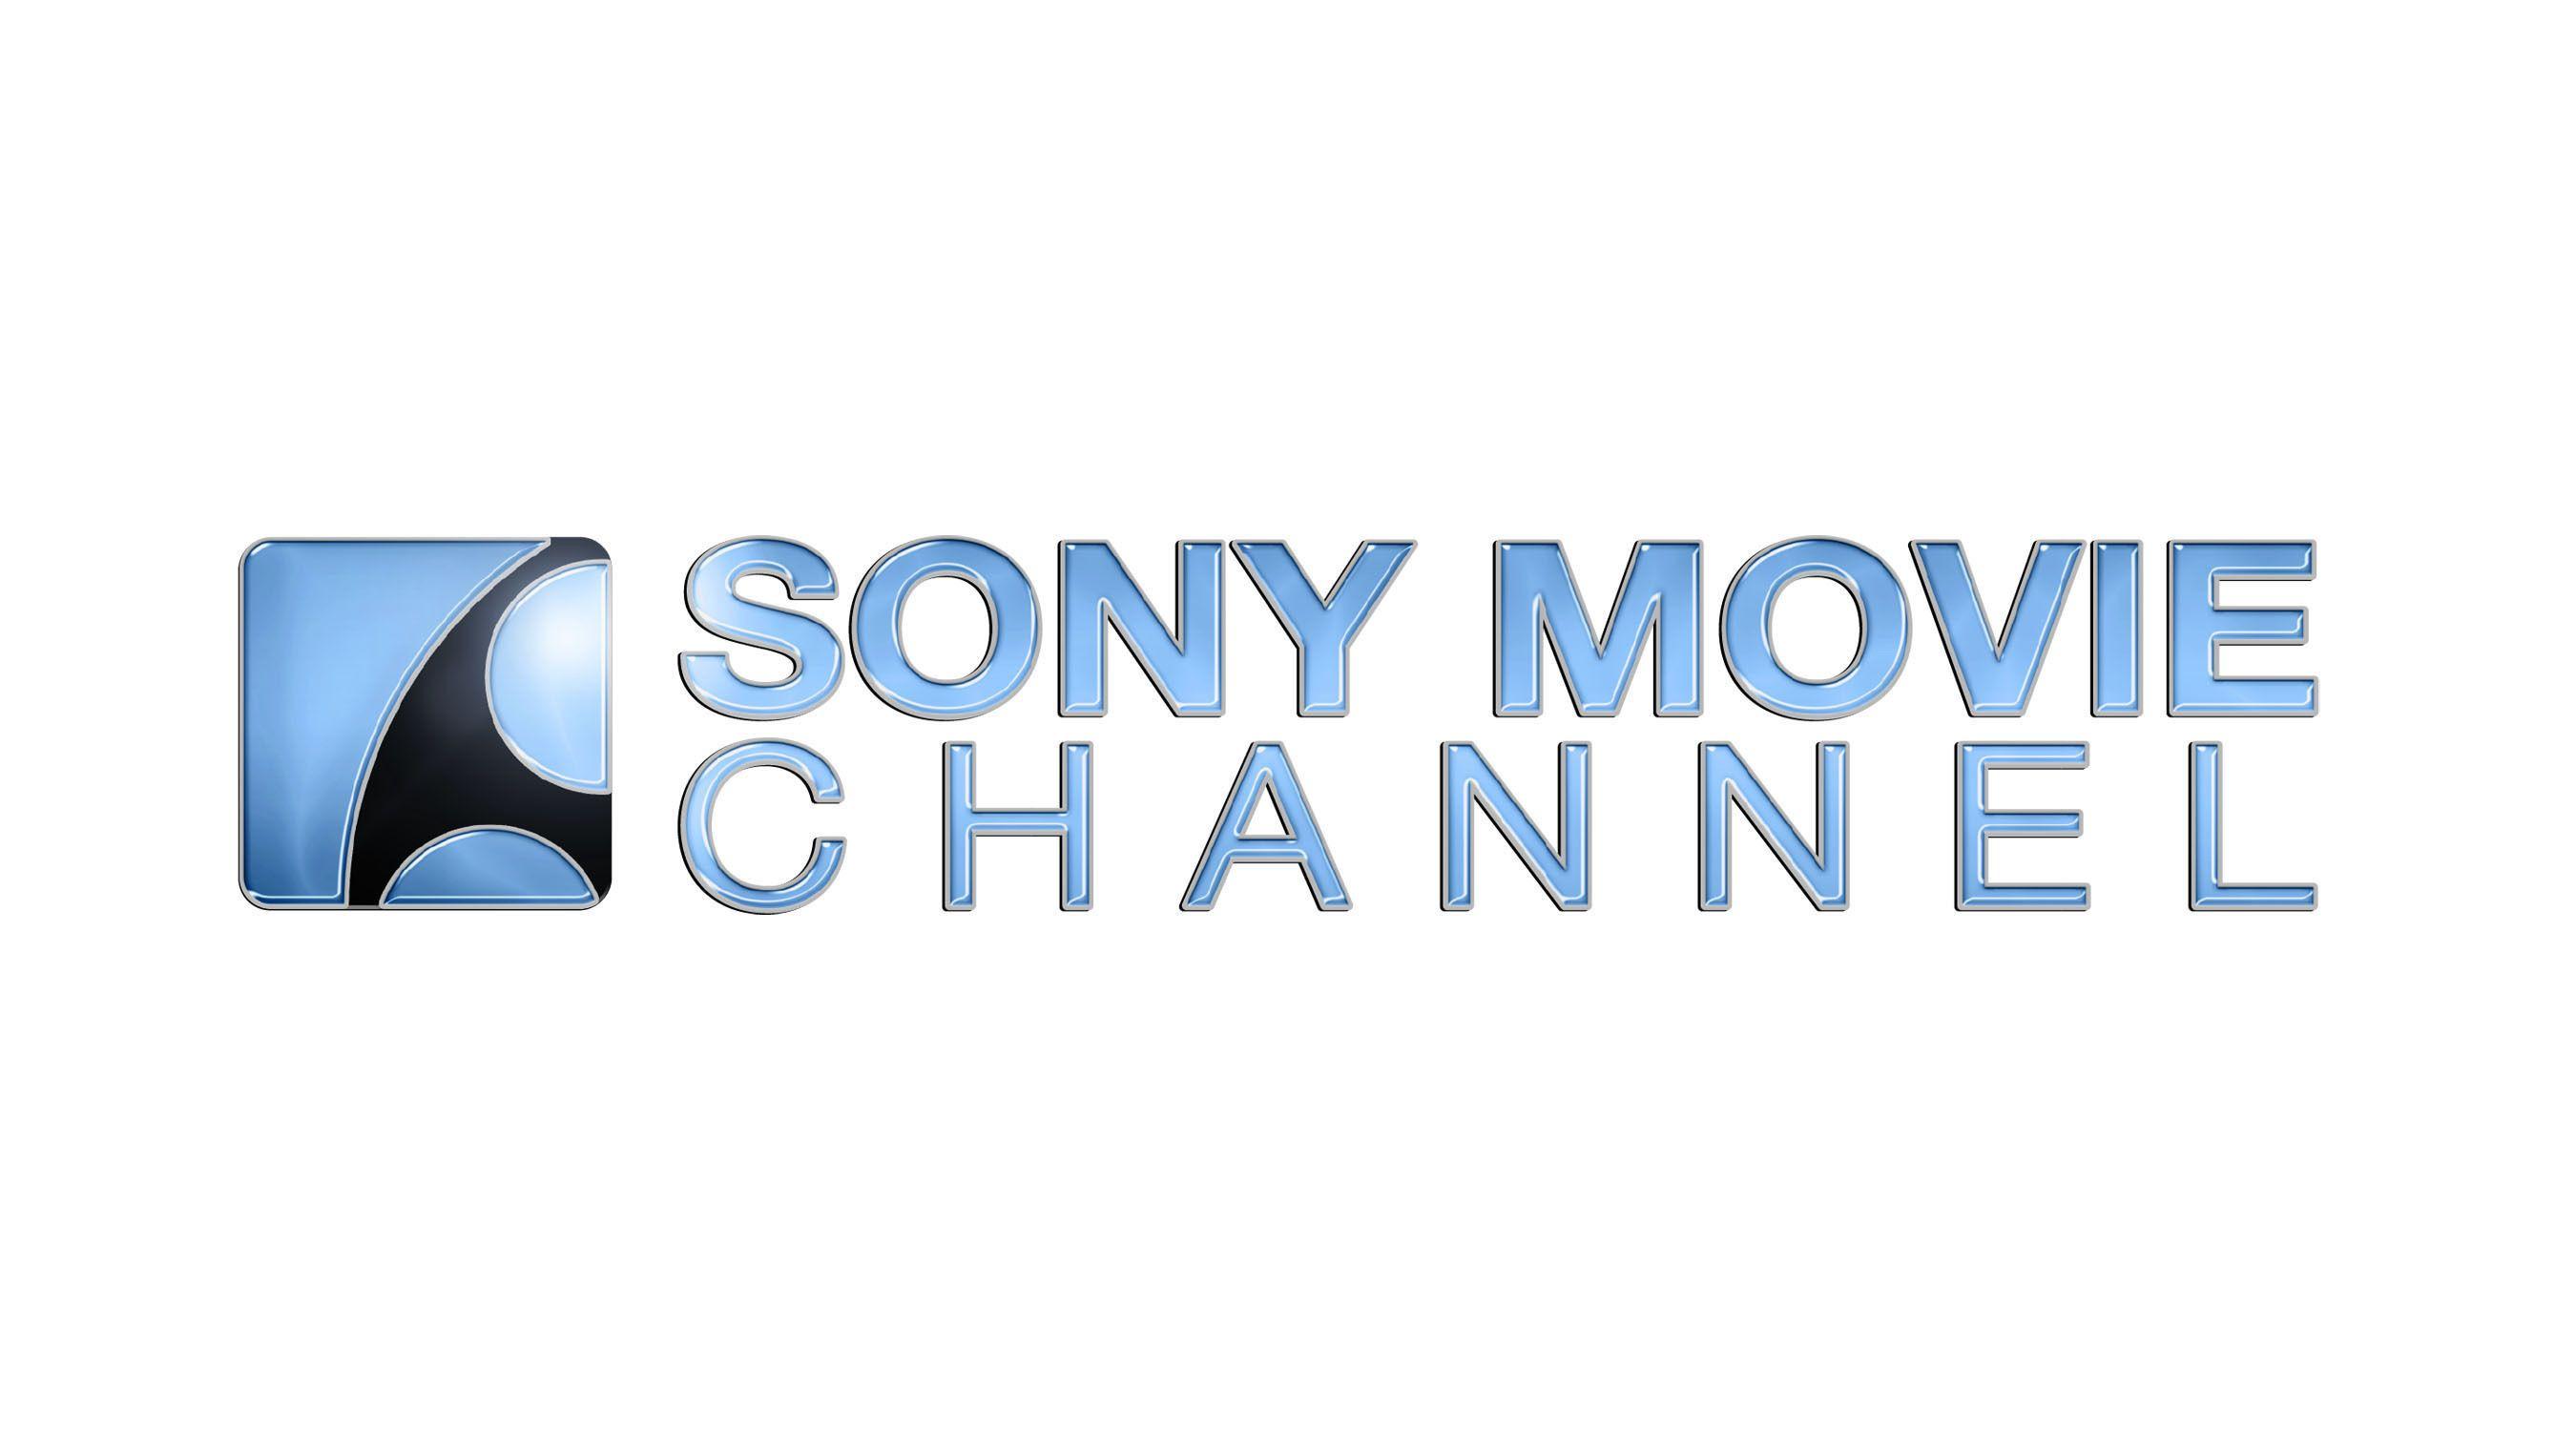 The Movie Channel Logo - Sony Movie Channel Highlights Robert De Niro With A 